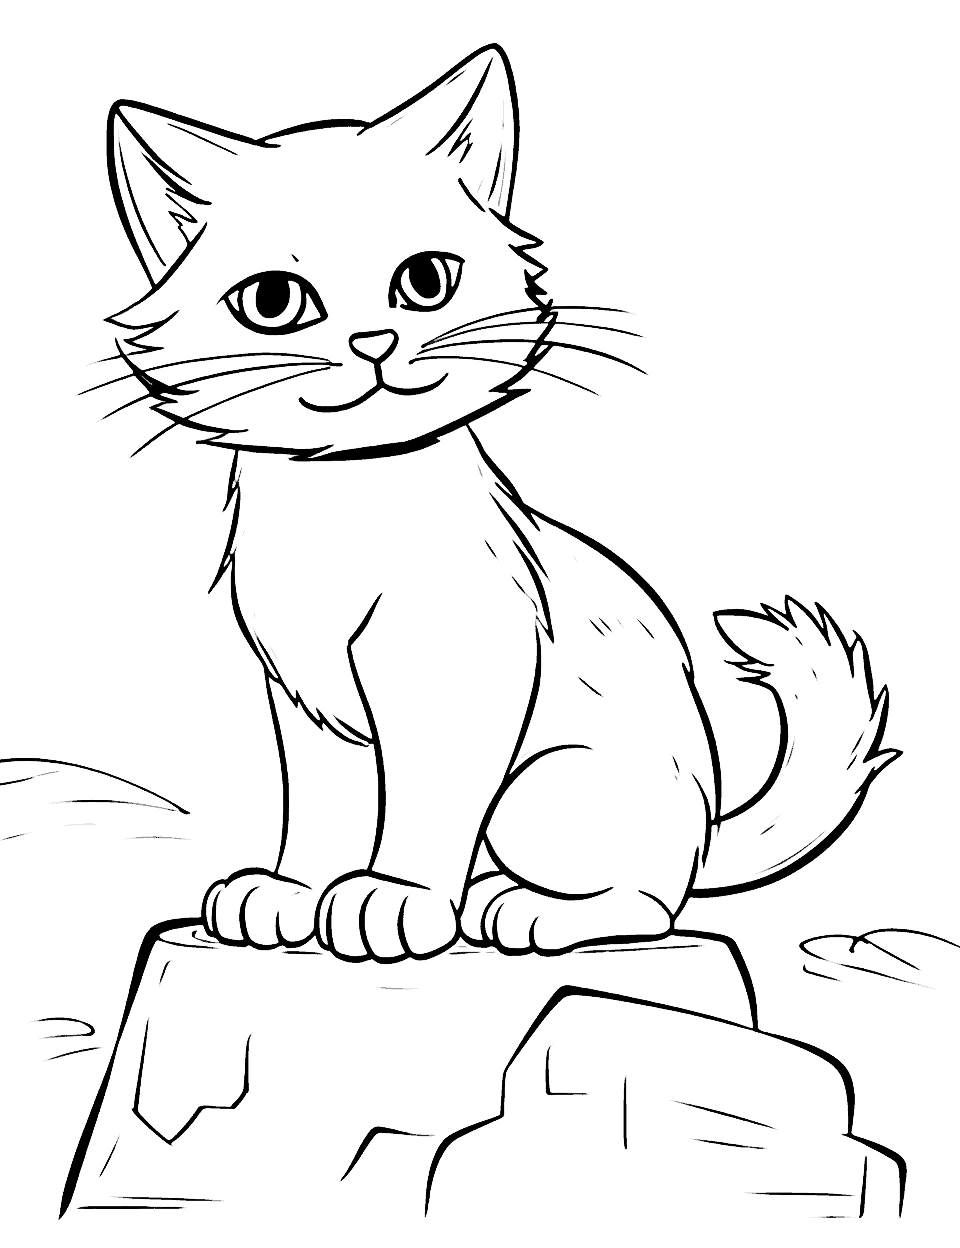 Warrior Cat Protecting Its Territory Coloring Page - A warrior cat standing strong on a rock, protecting its territory from intruders.